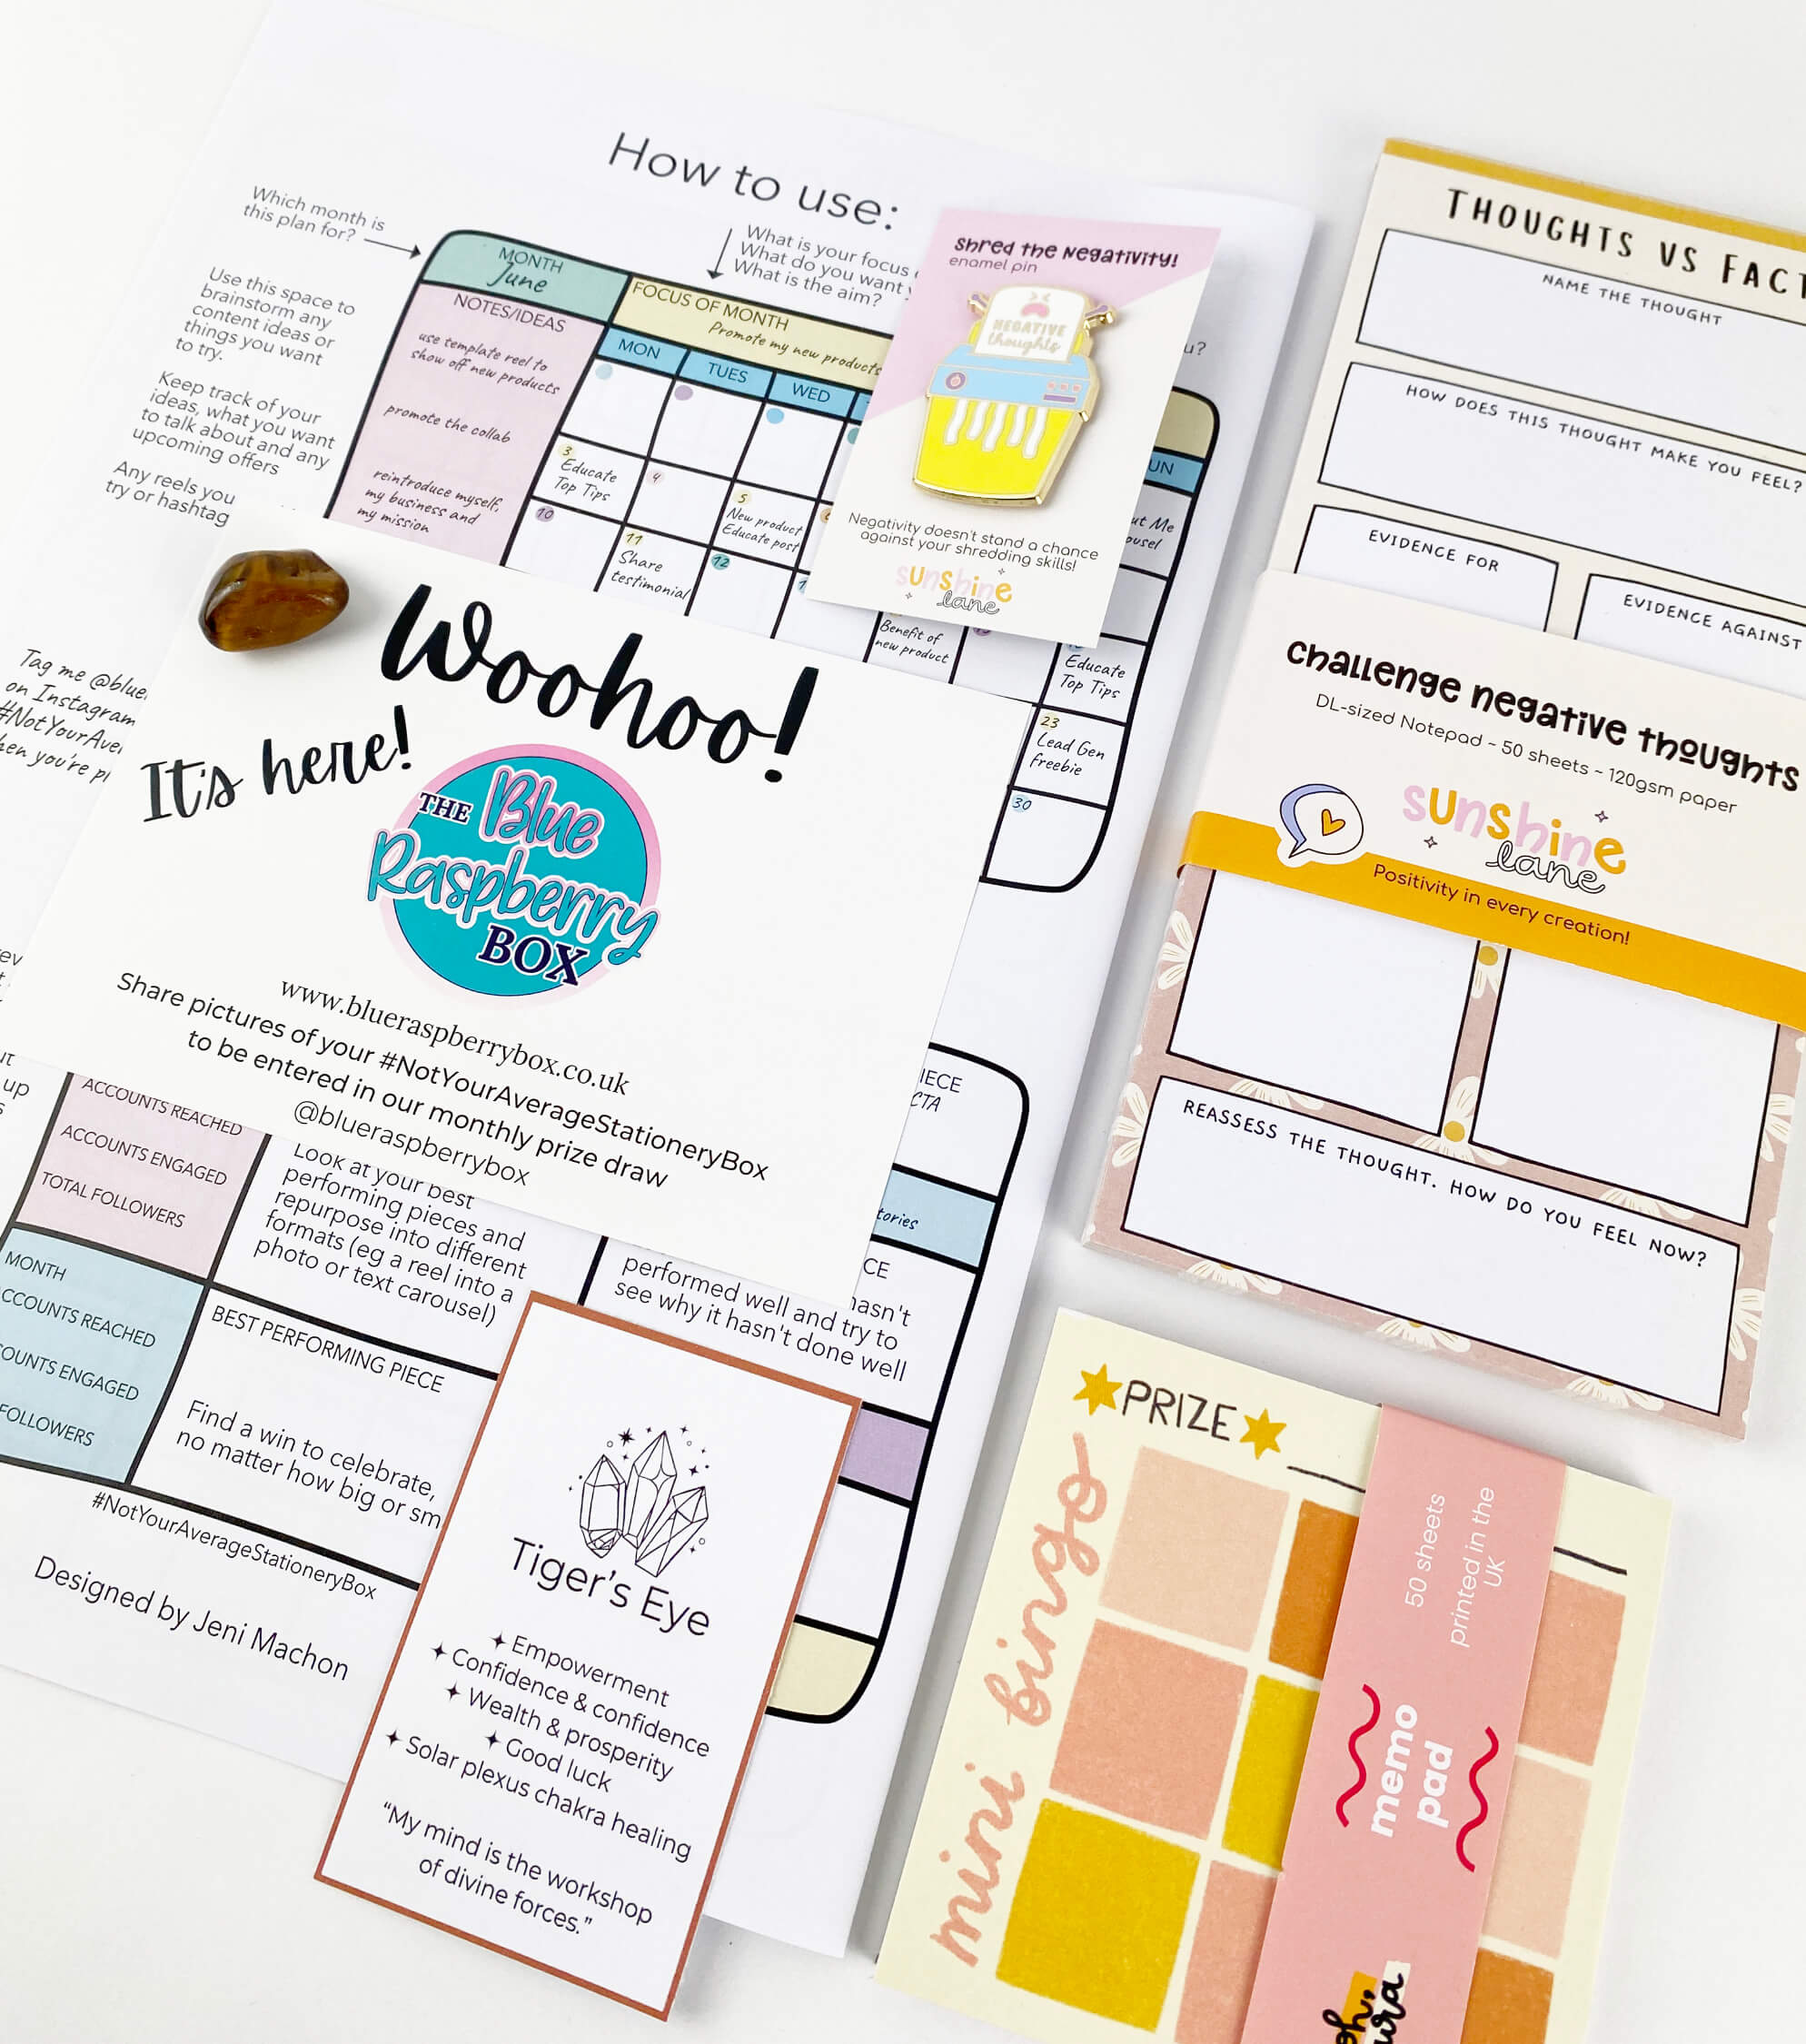 Mindset notepad, fun memo pad next to a social media wall planner with crystal and enamel pin on a white desk